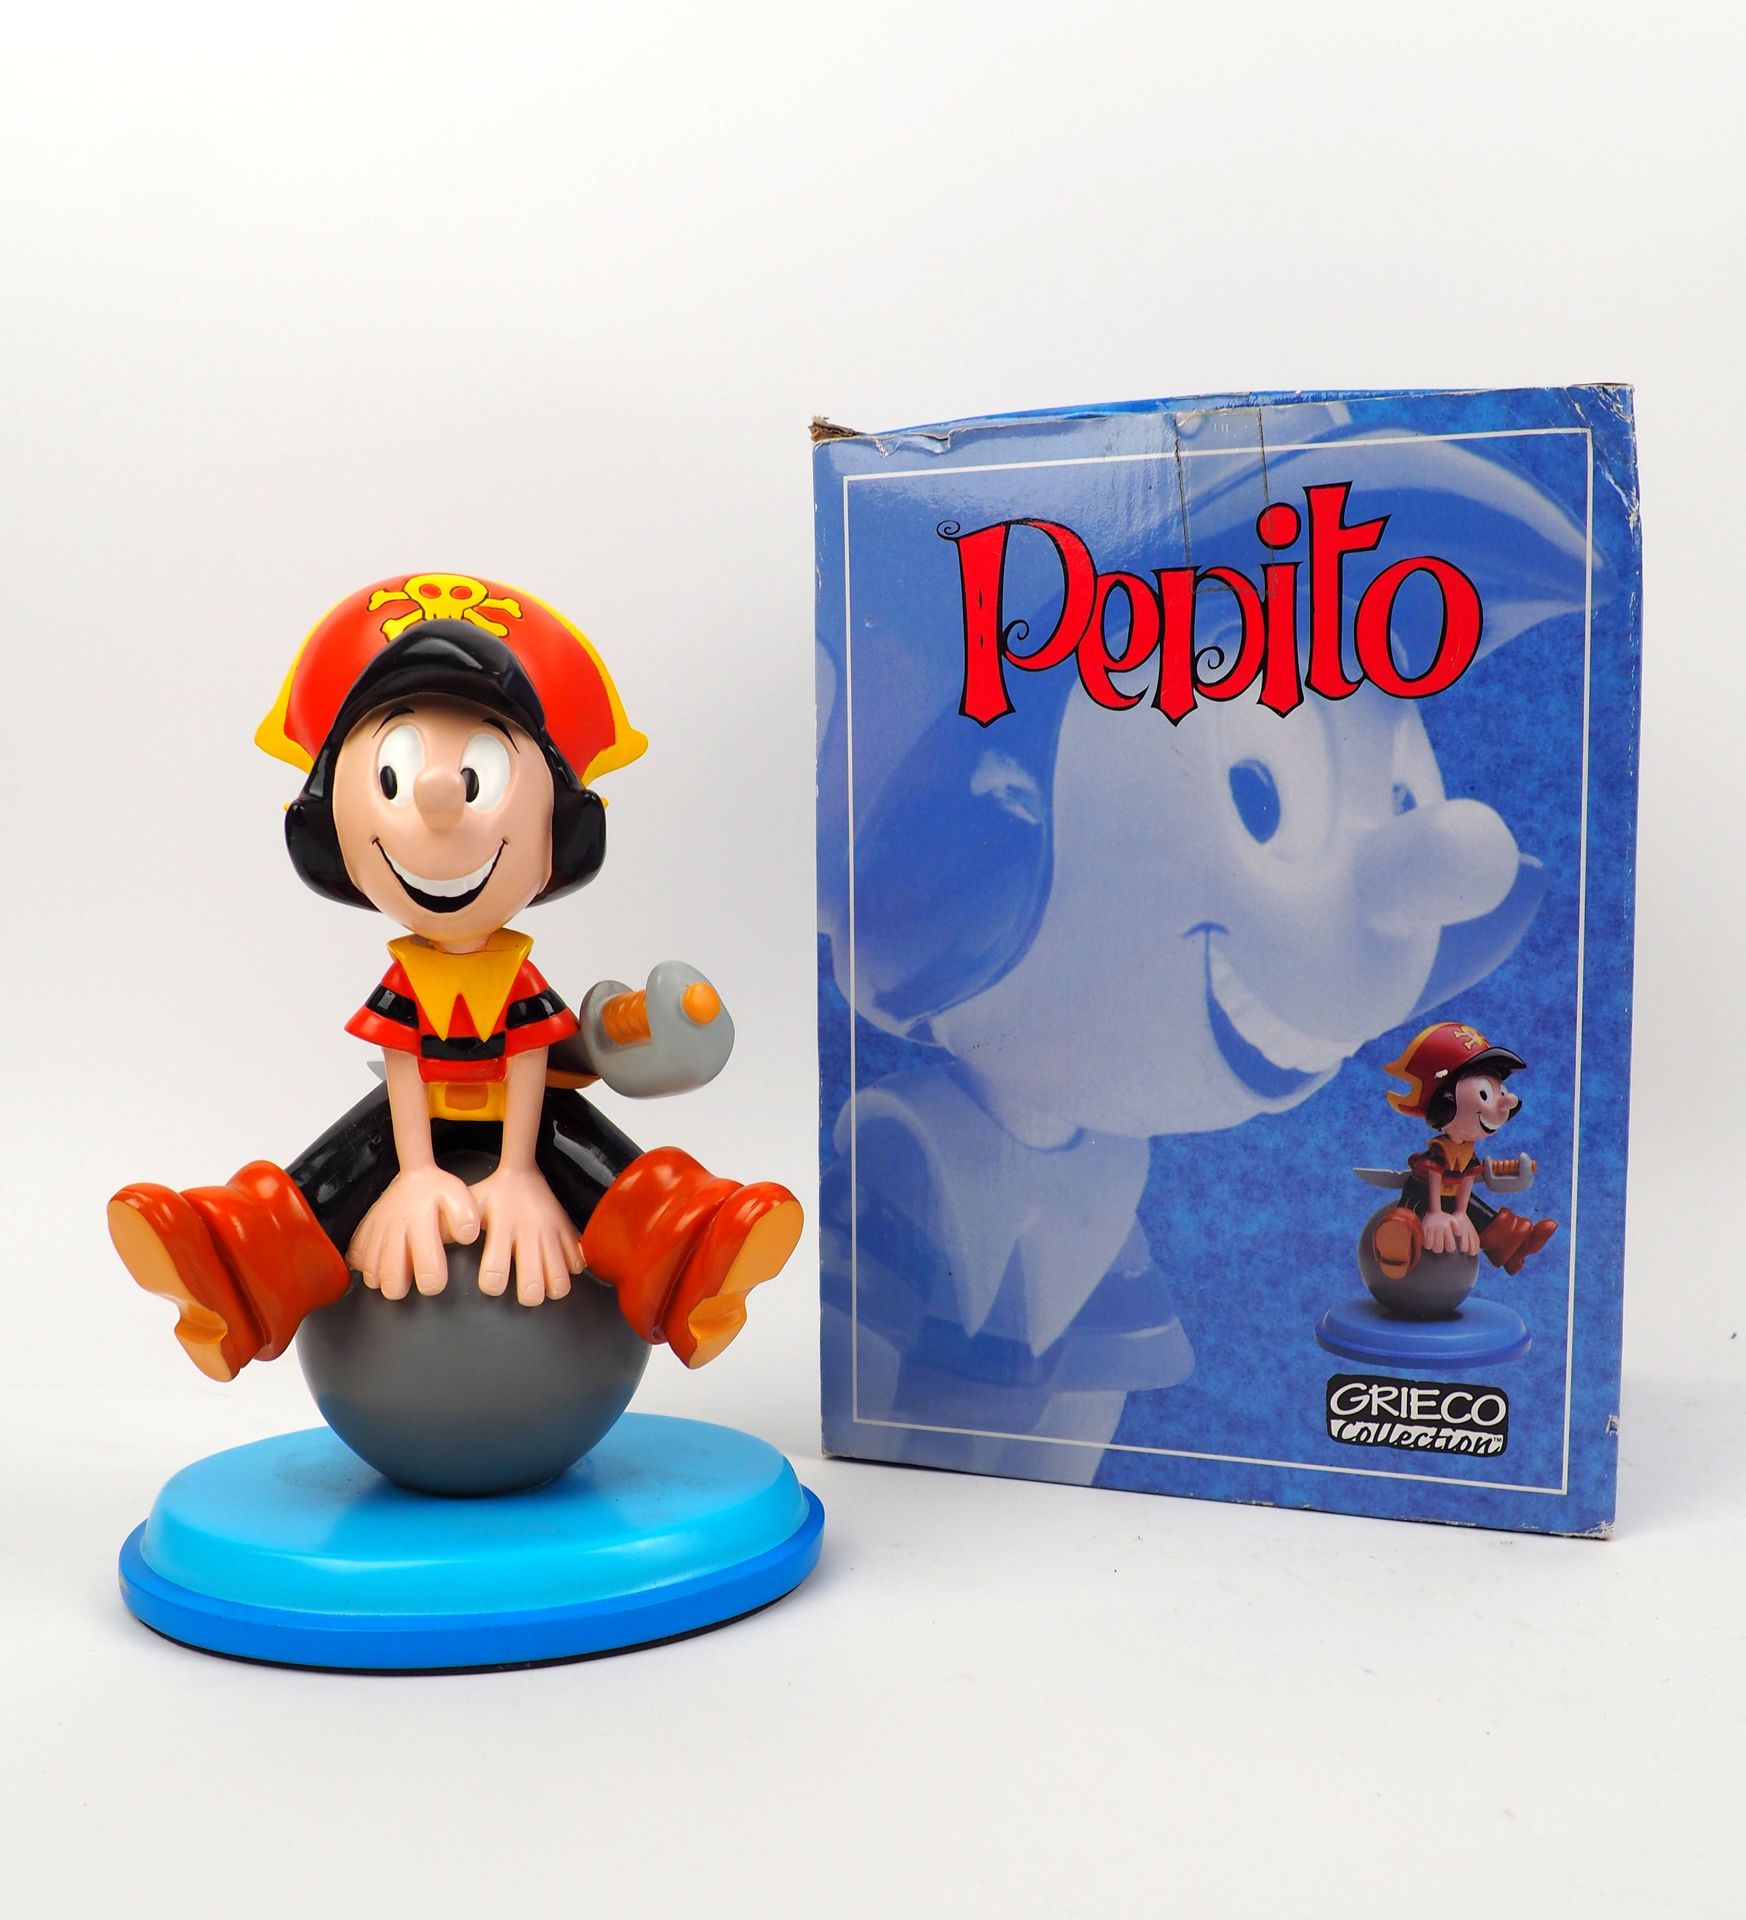 Null BOTTARO
Pepito
Figurine edited by Grieco, limited edition to 500 copies
(bo&hellip;